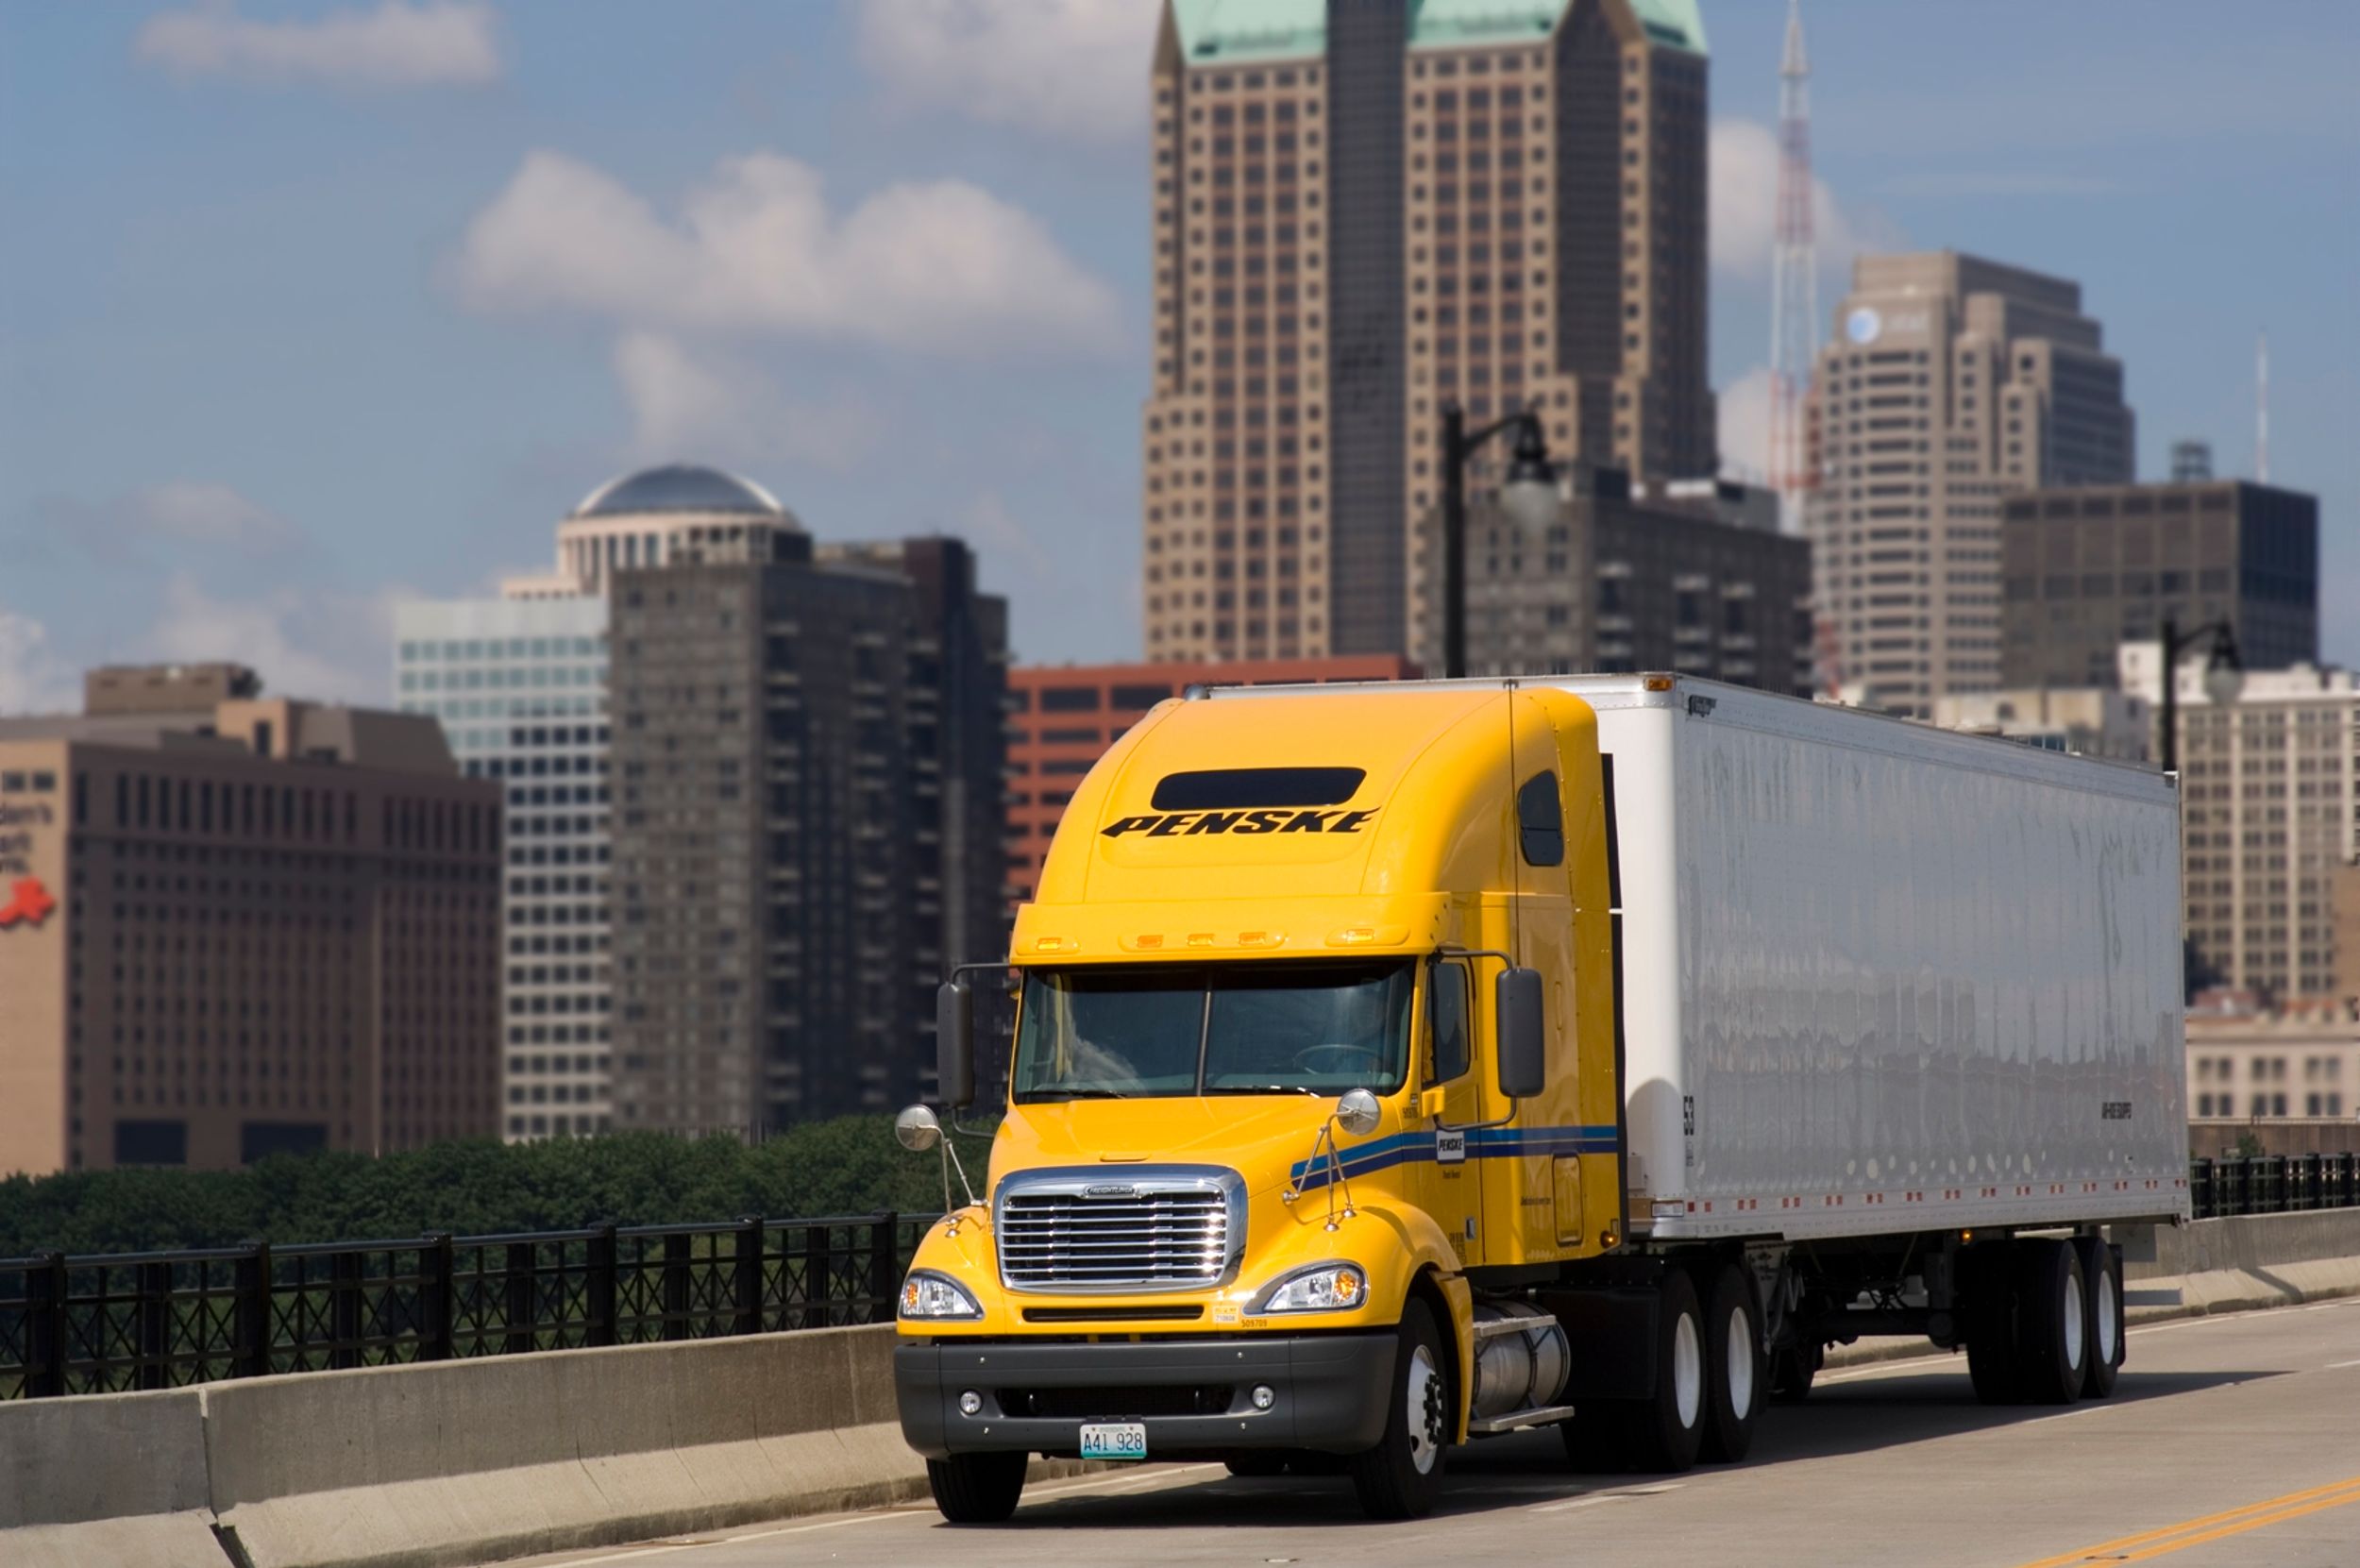 Penske to Exhibit at IFDA Conference/Sponsor IFDA Truck Driving Event